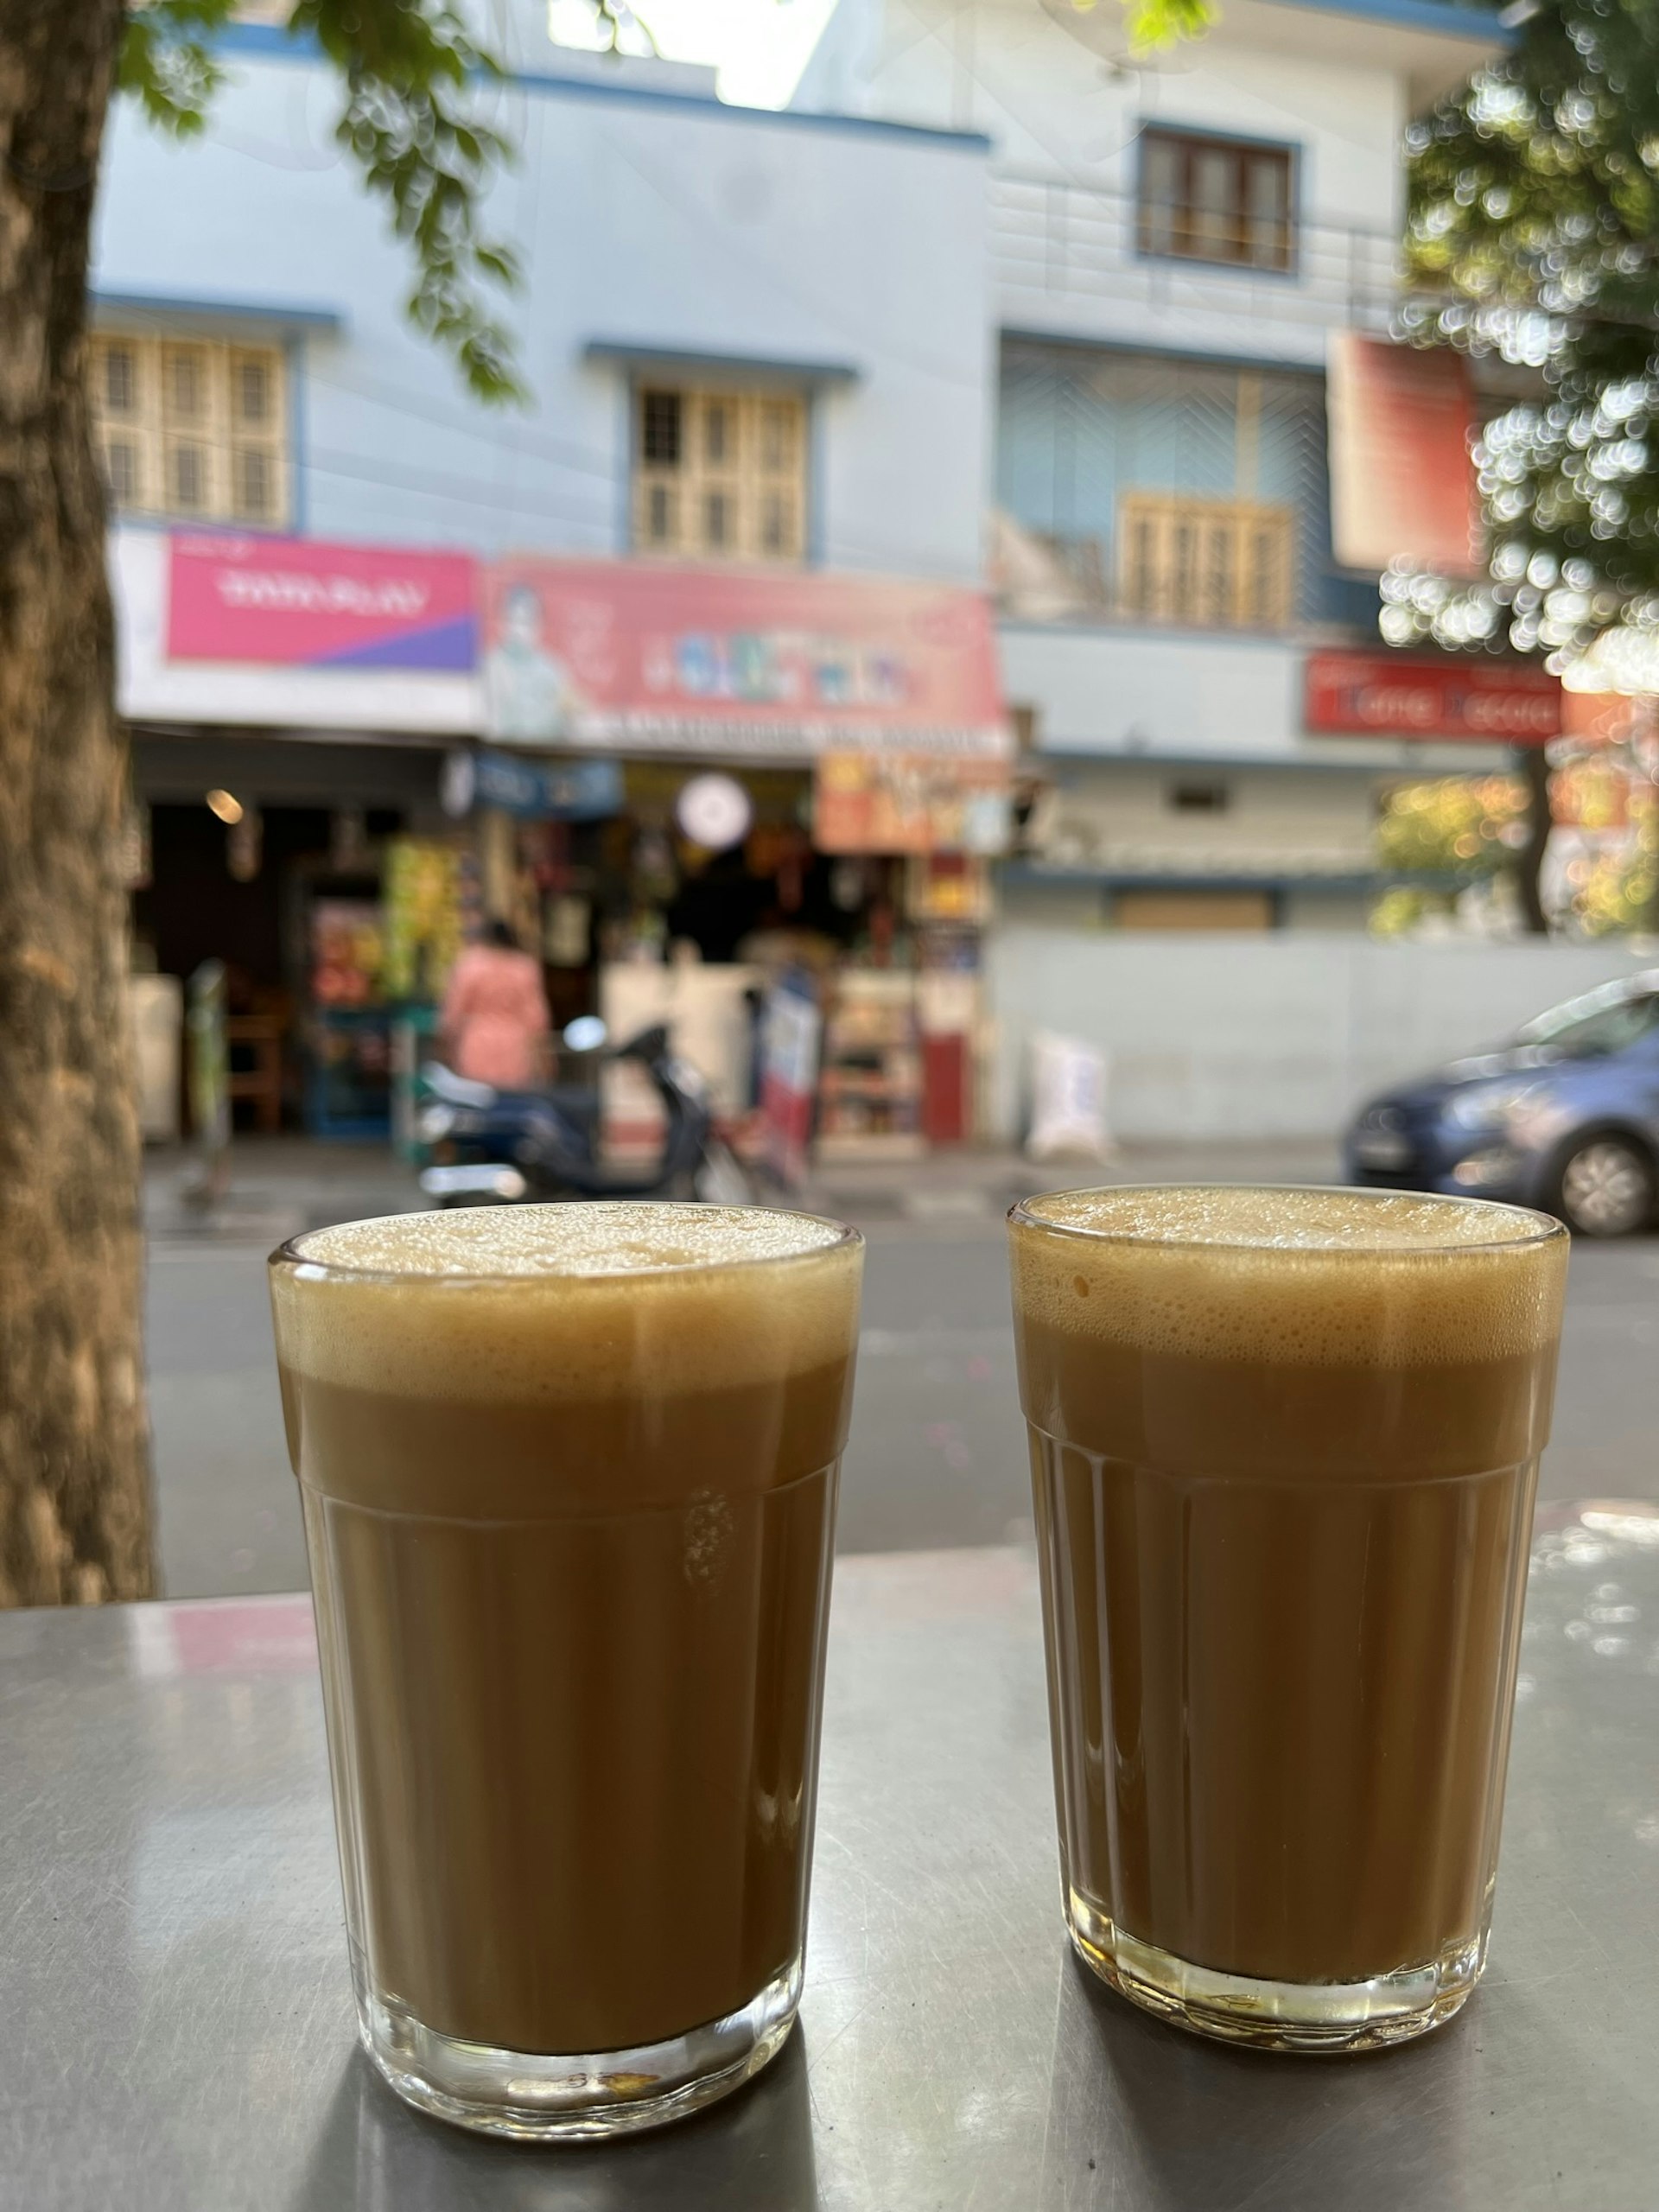 Two filter coffees served in glasses at an outside table